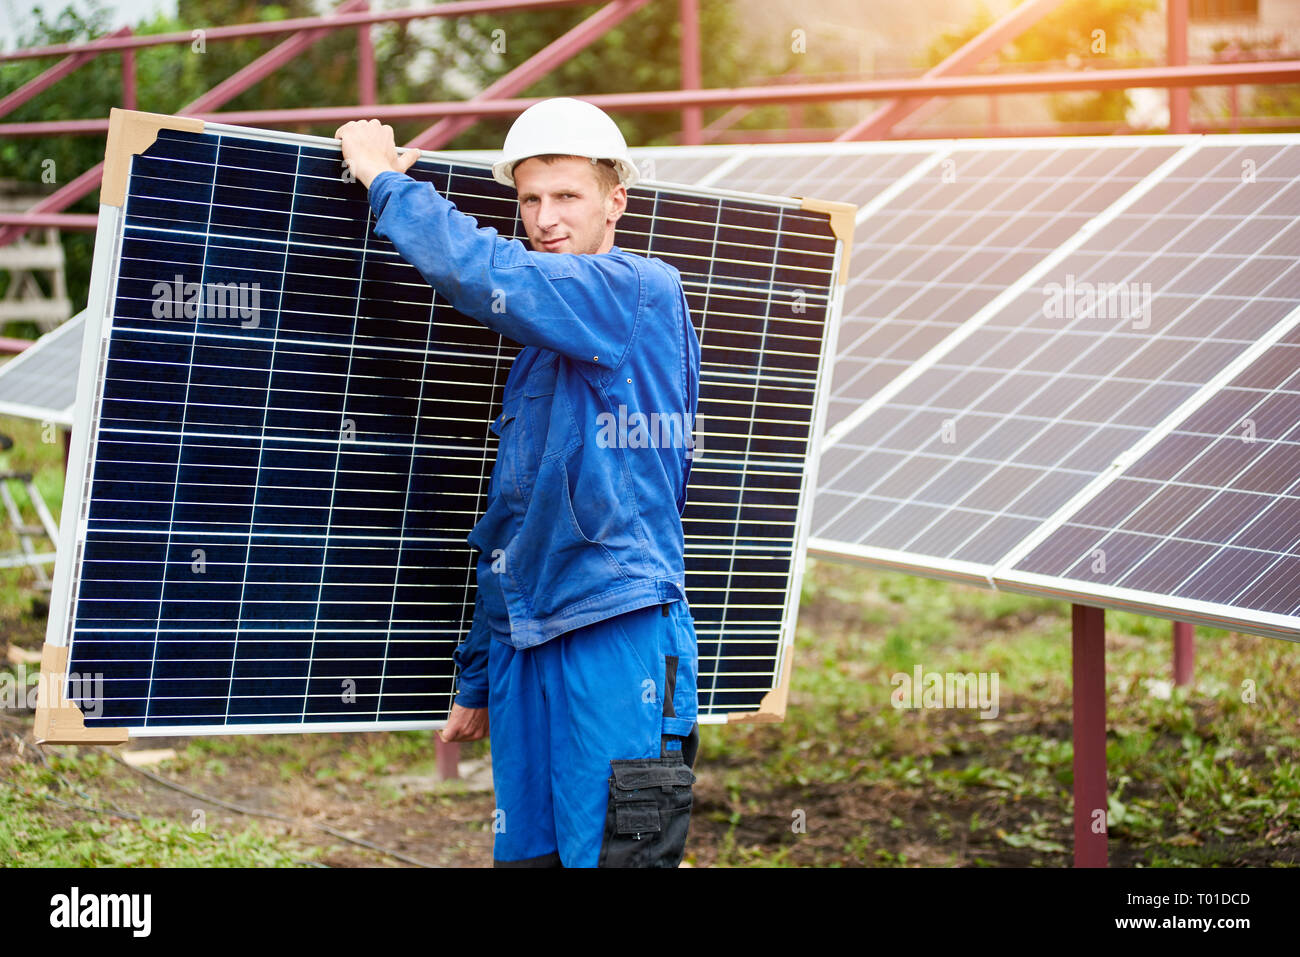 Portrait of worker in blue uniform and protective helmet carrying big shiny solar photo voltaic panel to almost finished exterior metal platform on su Stock Photo